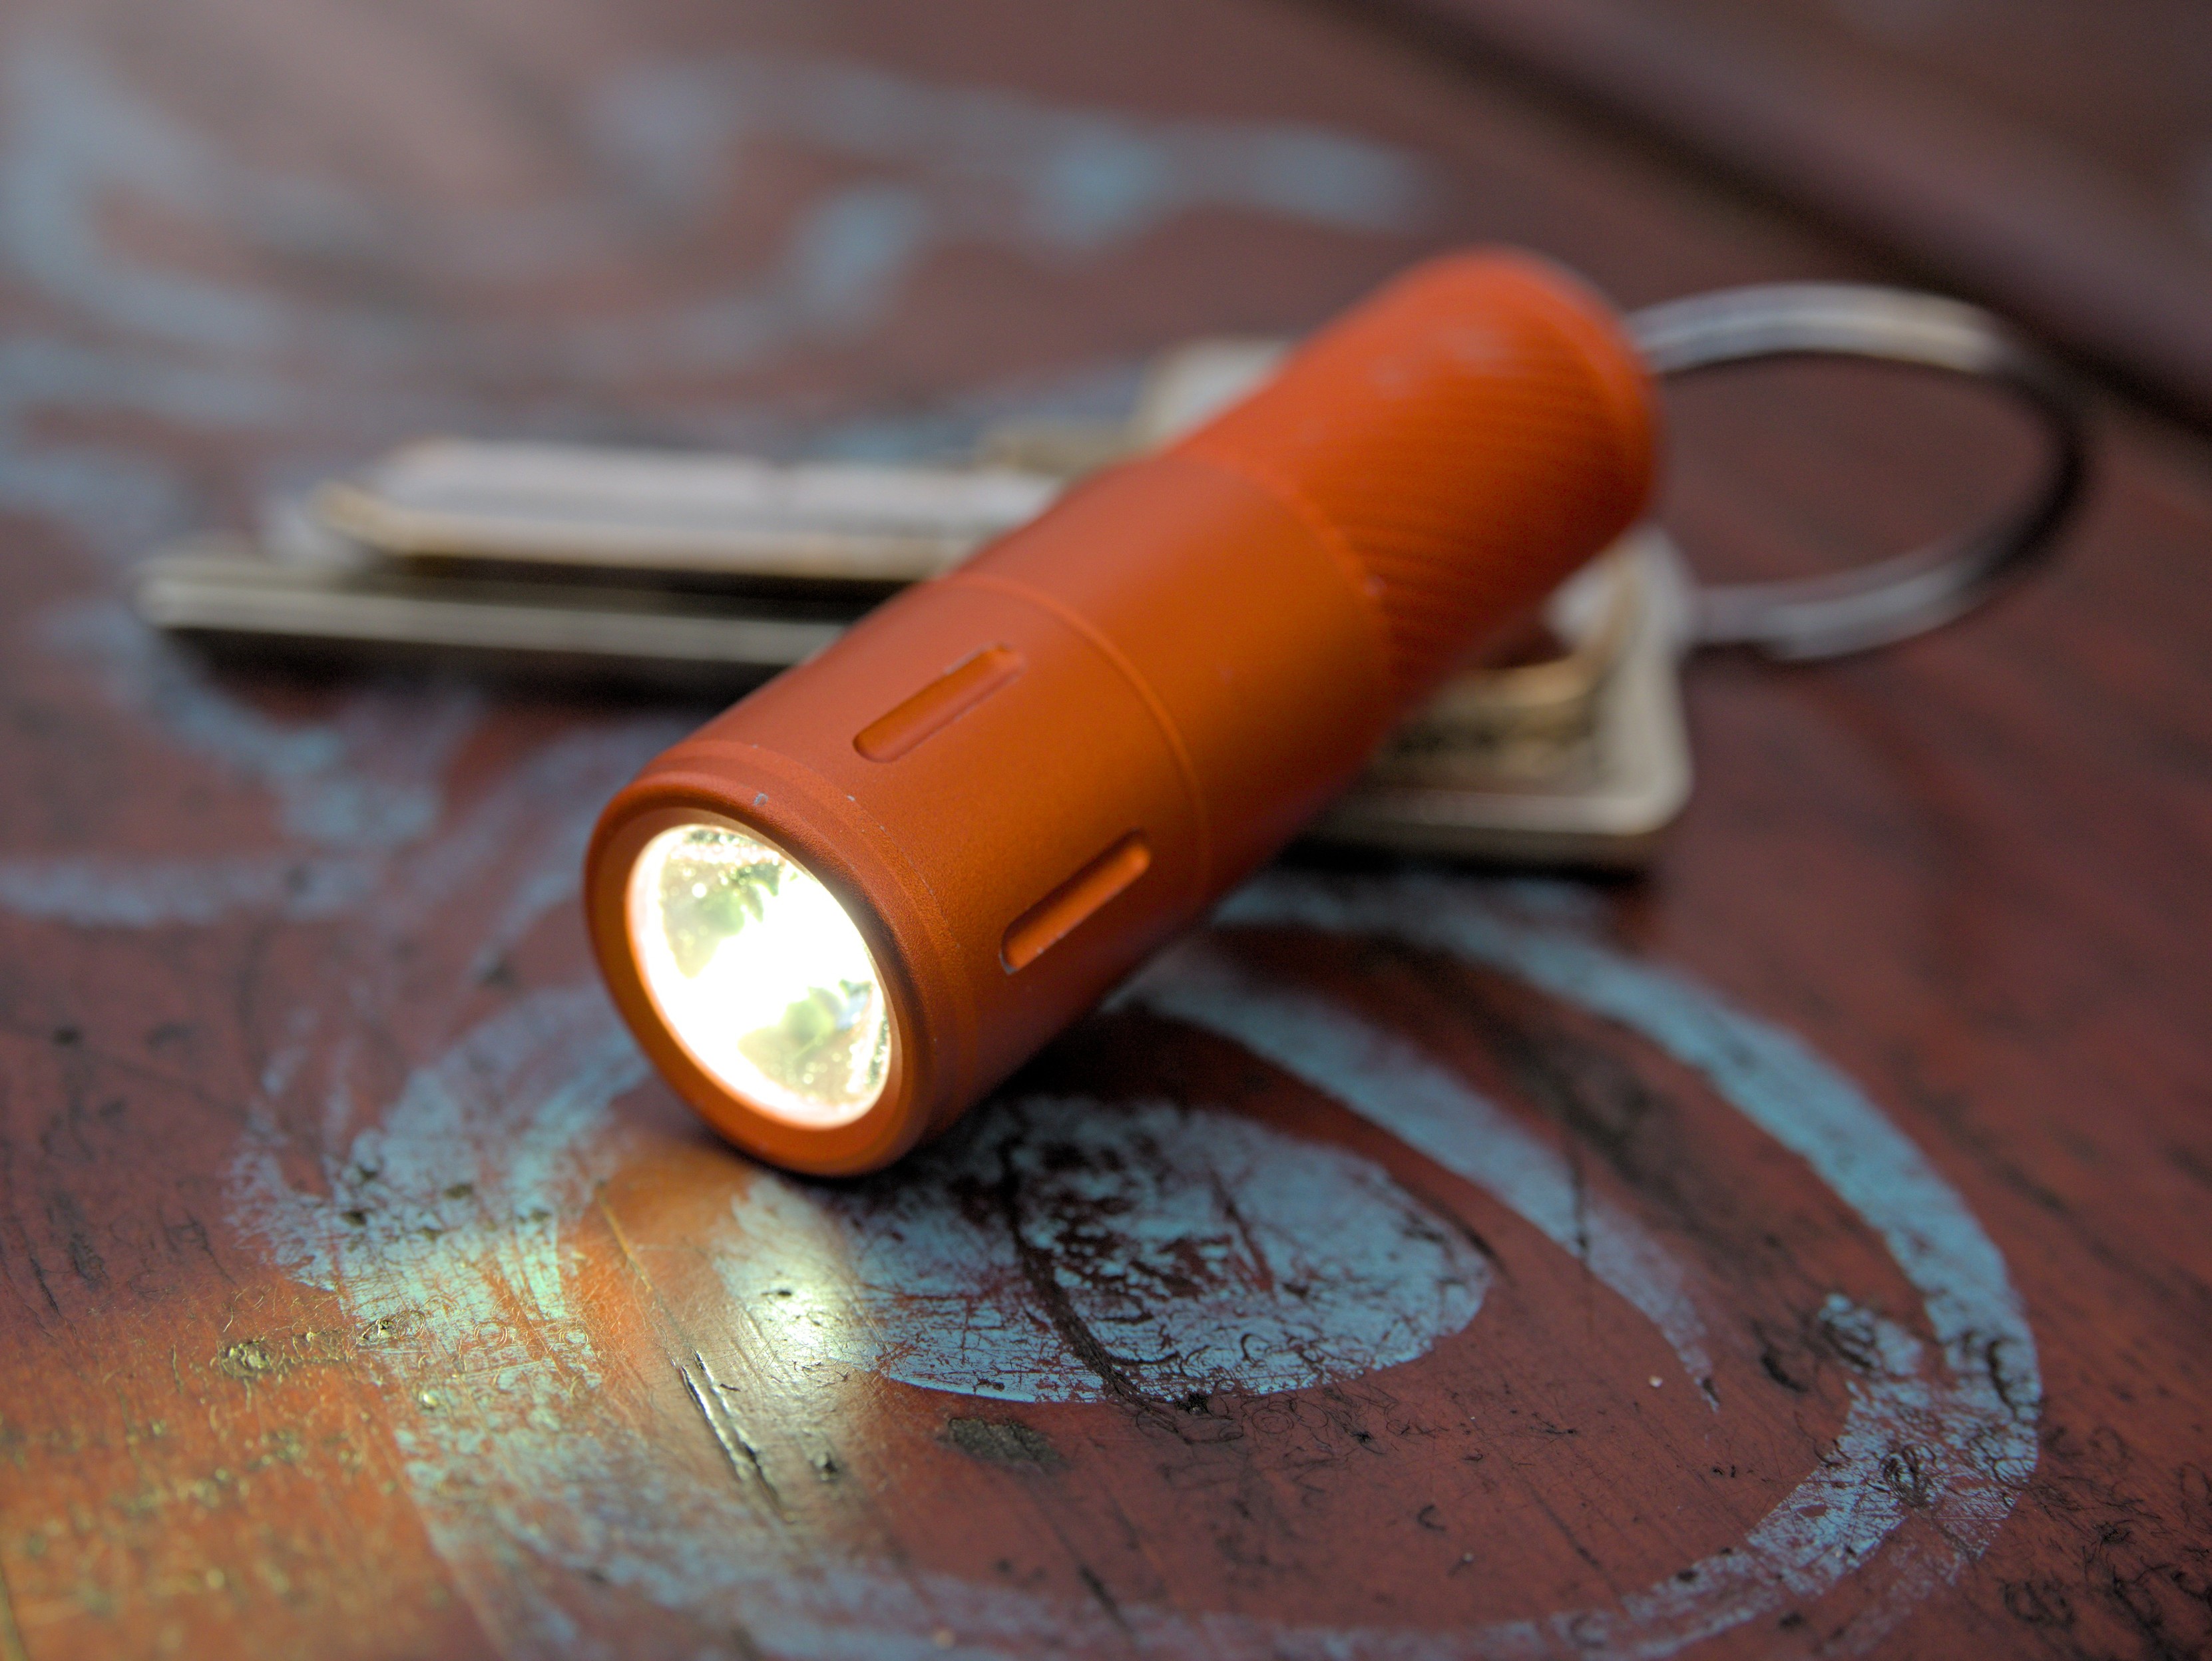 An orange Skilhunt EK1 flashlight attached to a keyring, turned on and illuminating a park bench